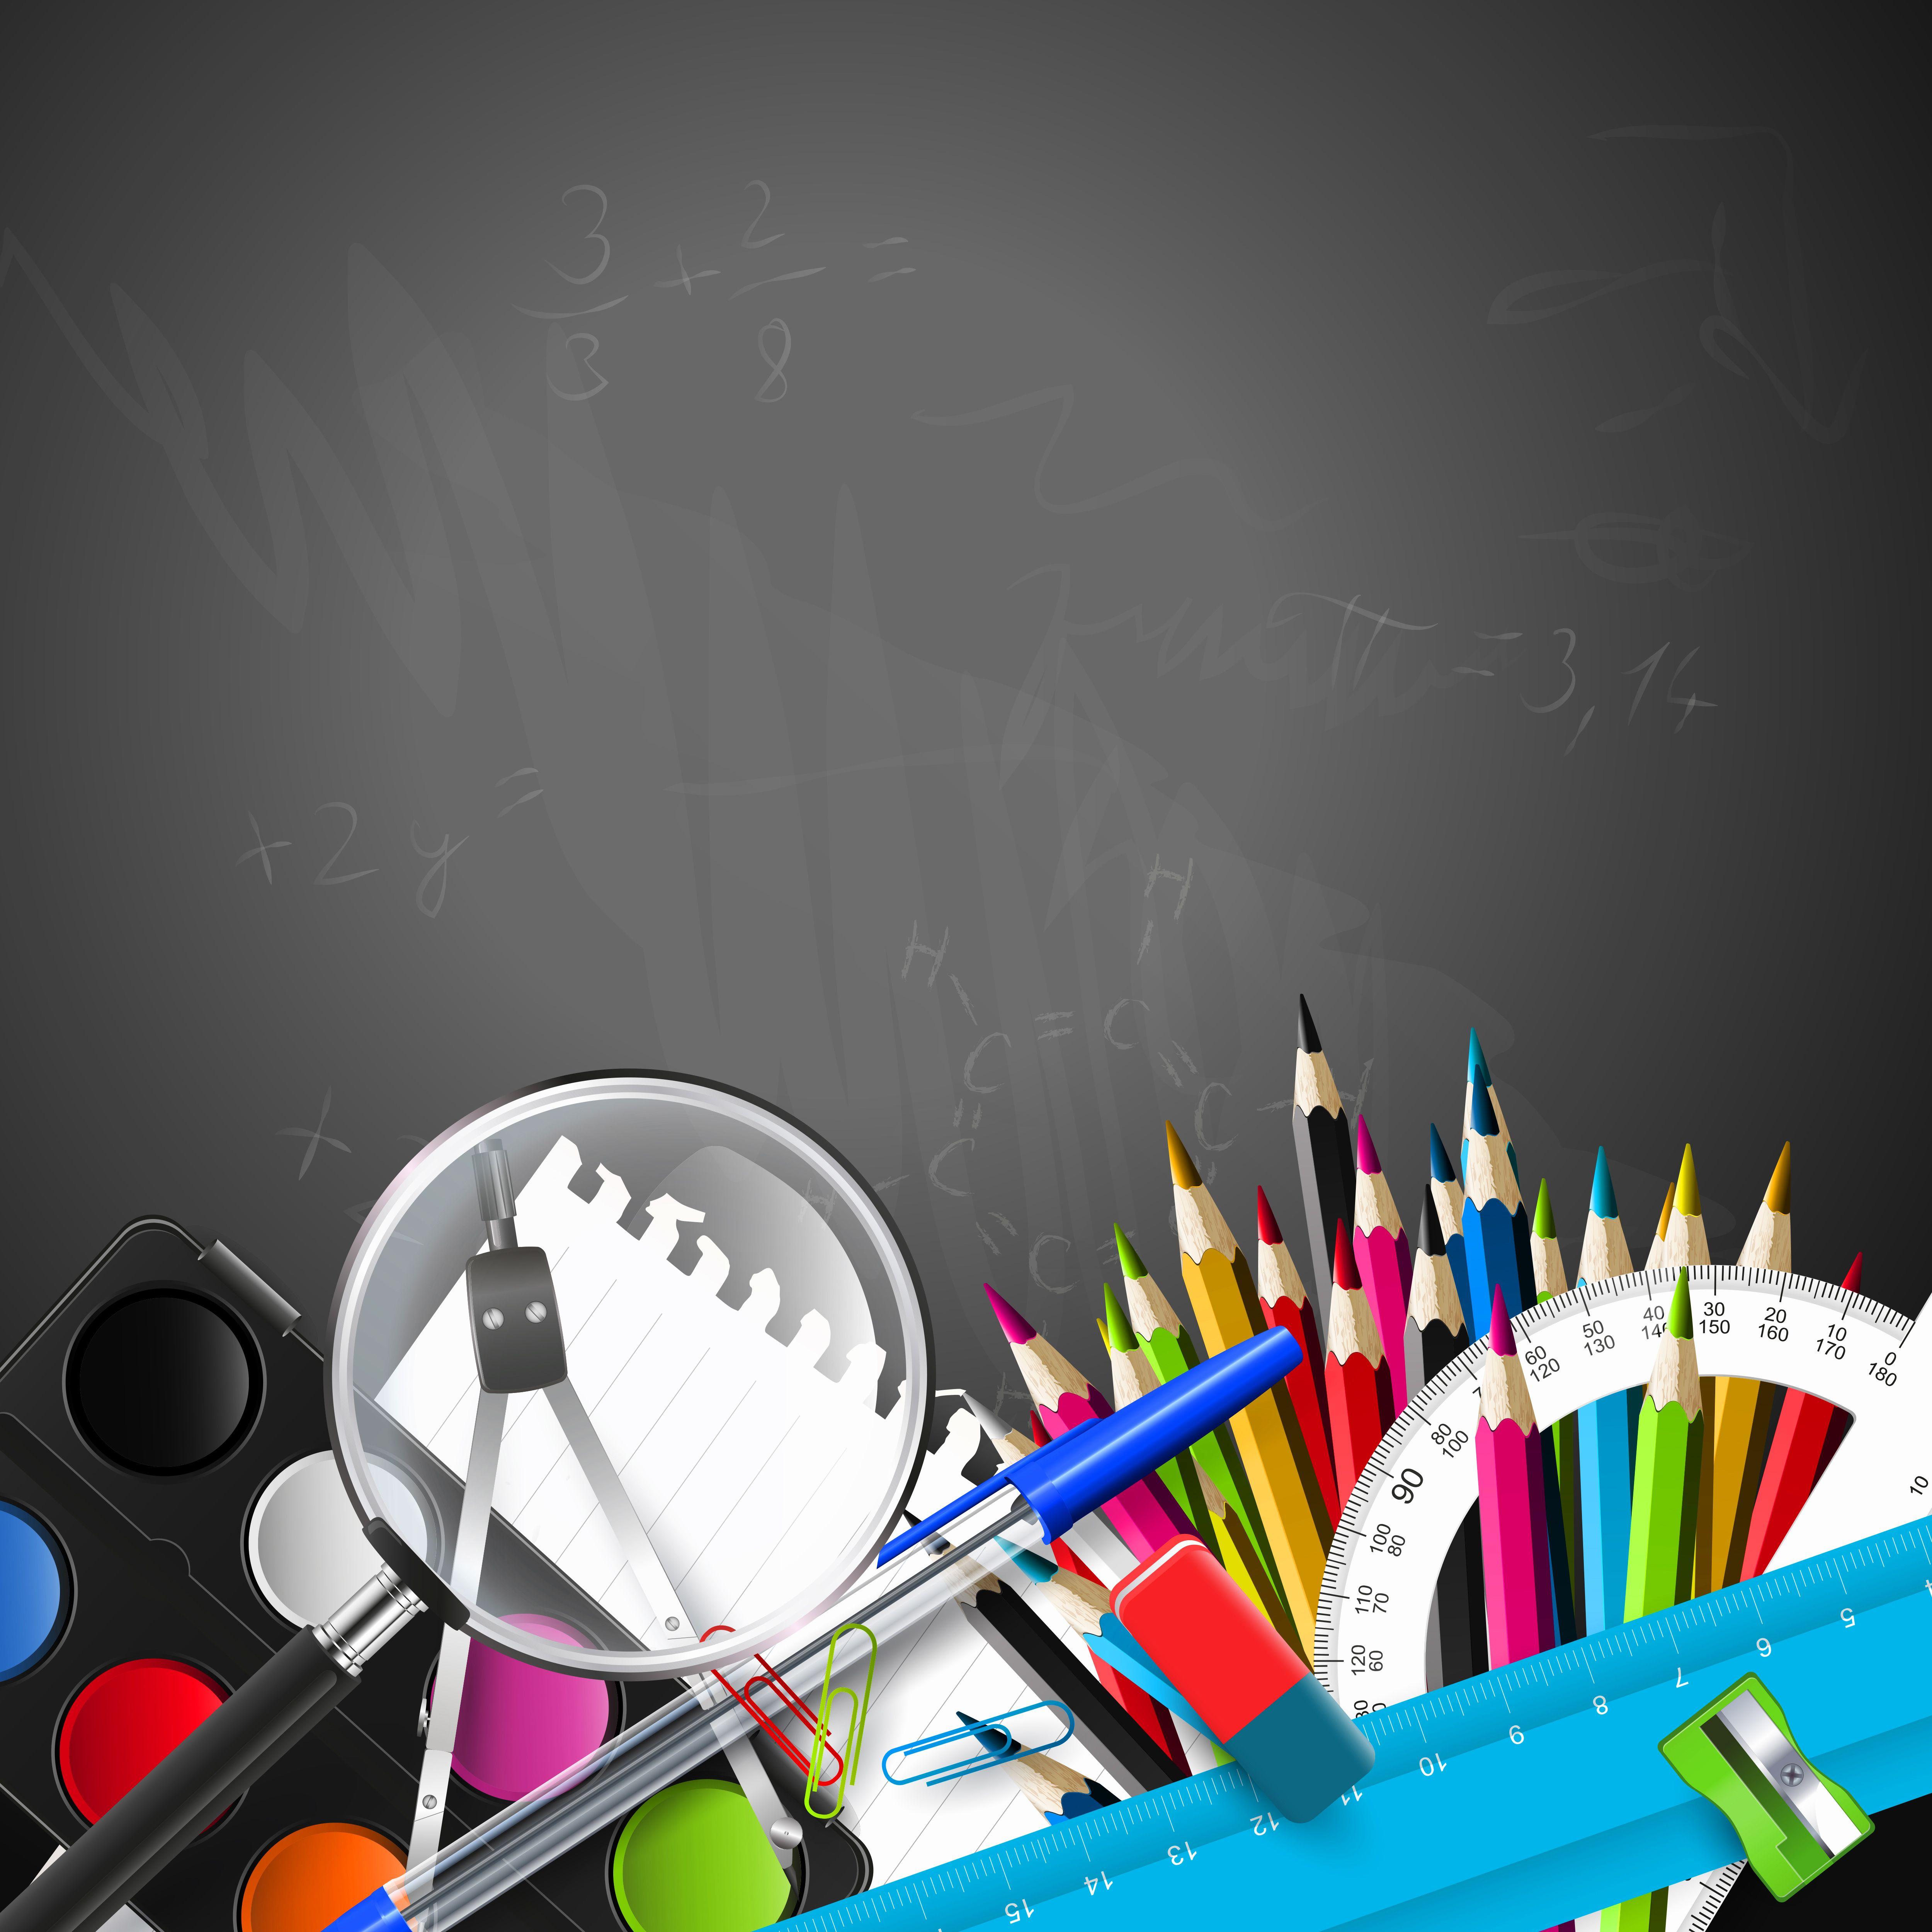 Back to School Wallpapers - Top Free Back to School Backgrounds -  WallpaperAccess